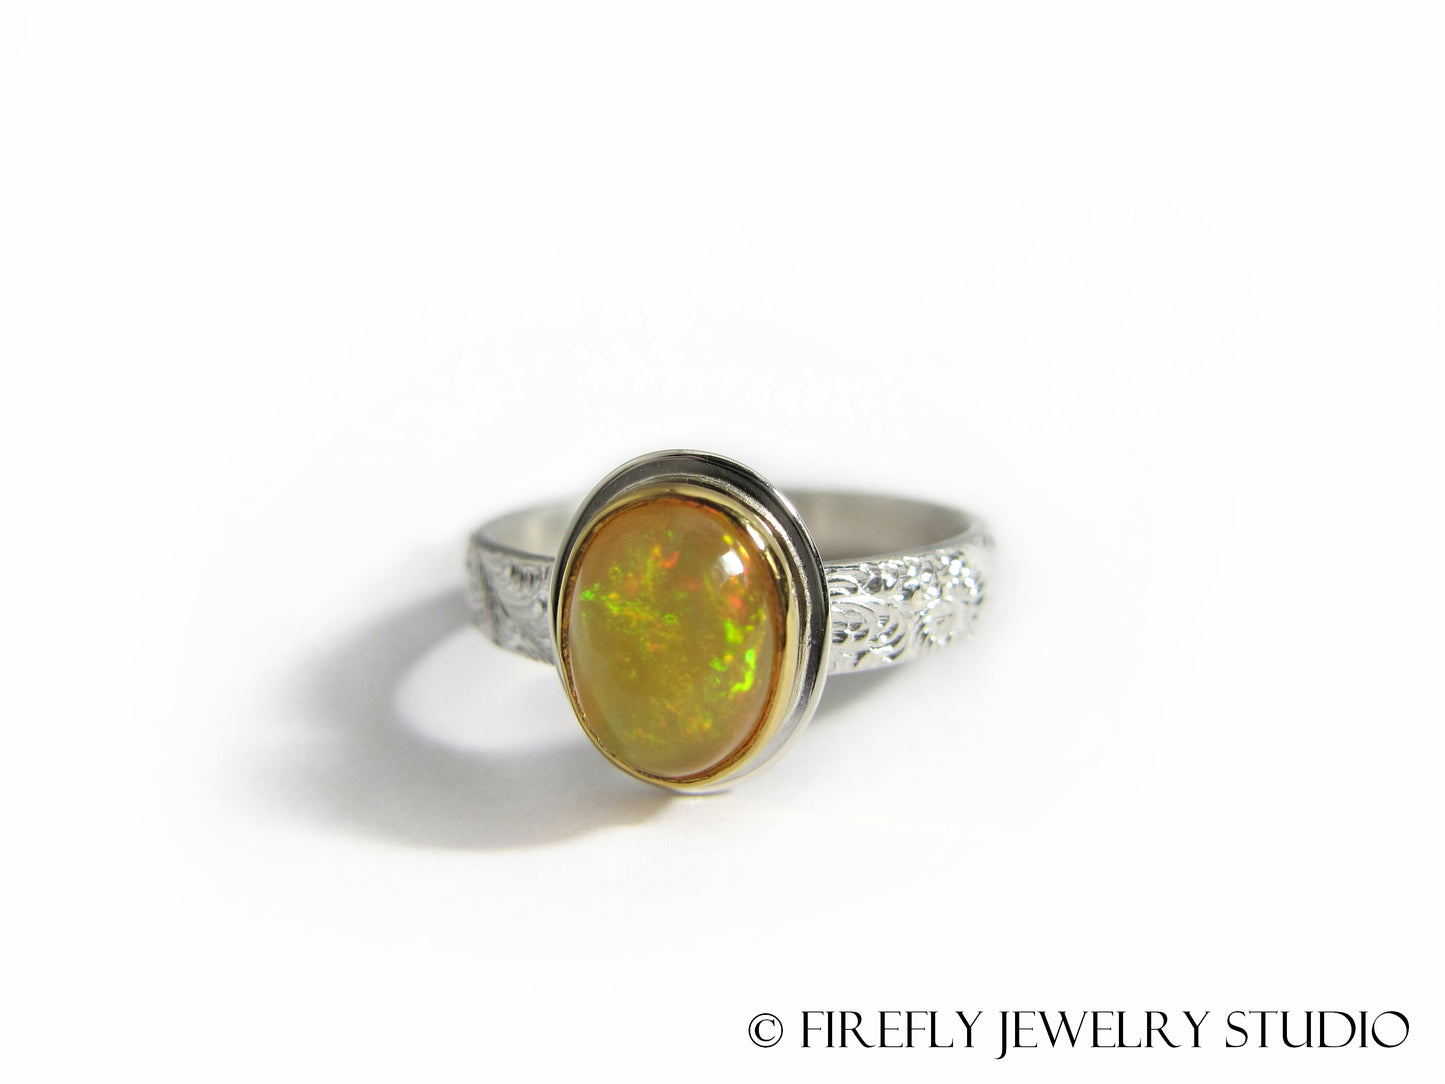 Ethiopian Opal Ring in 24k Gold and Sterling. Size 6.5 - Firefly Jewelry Studio